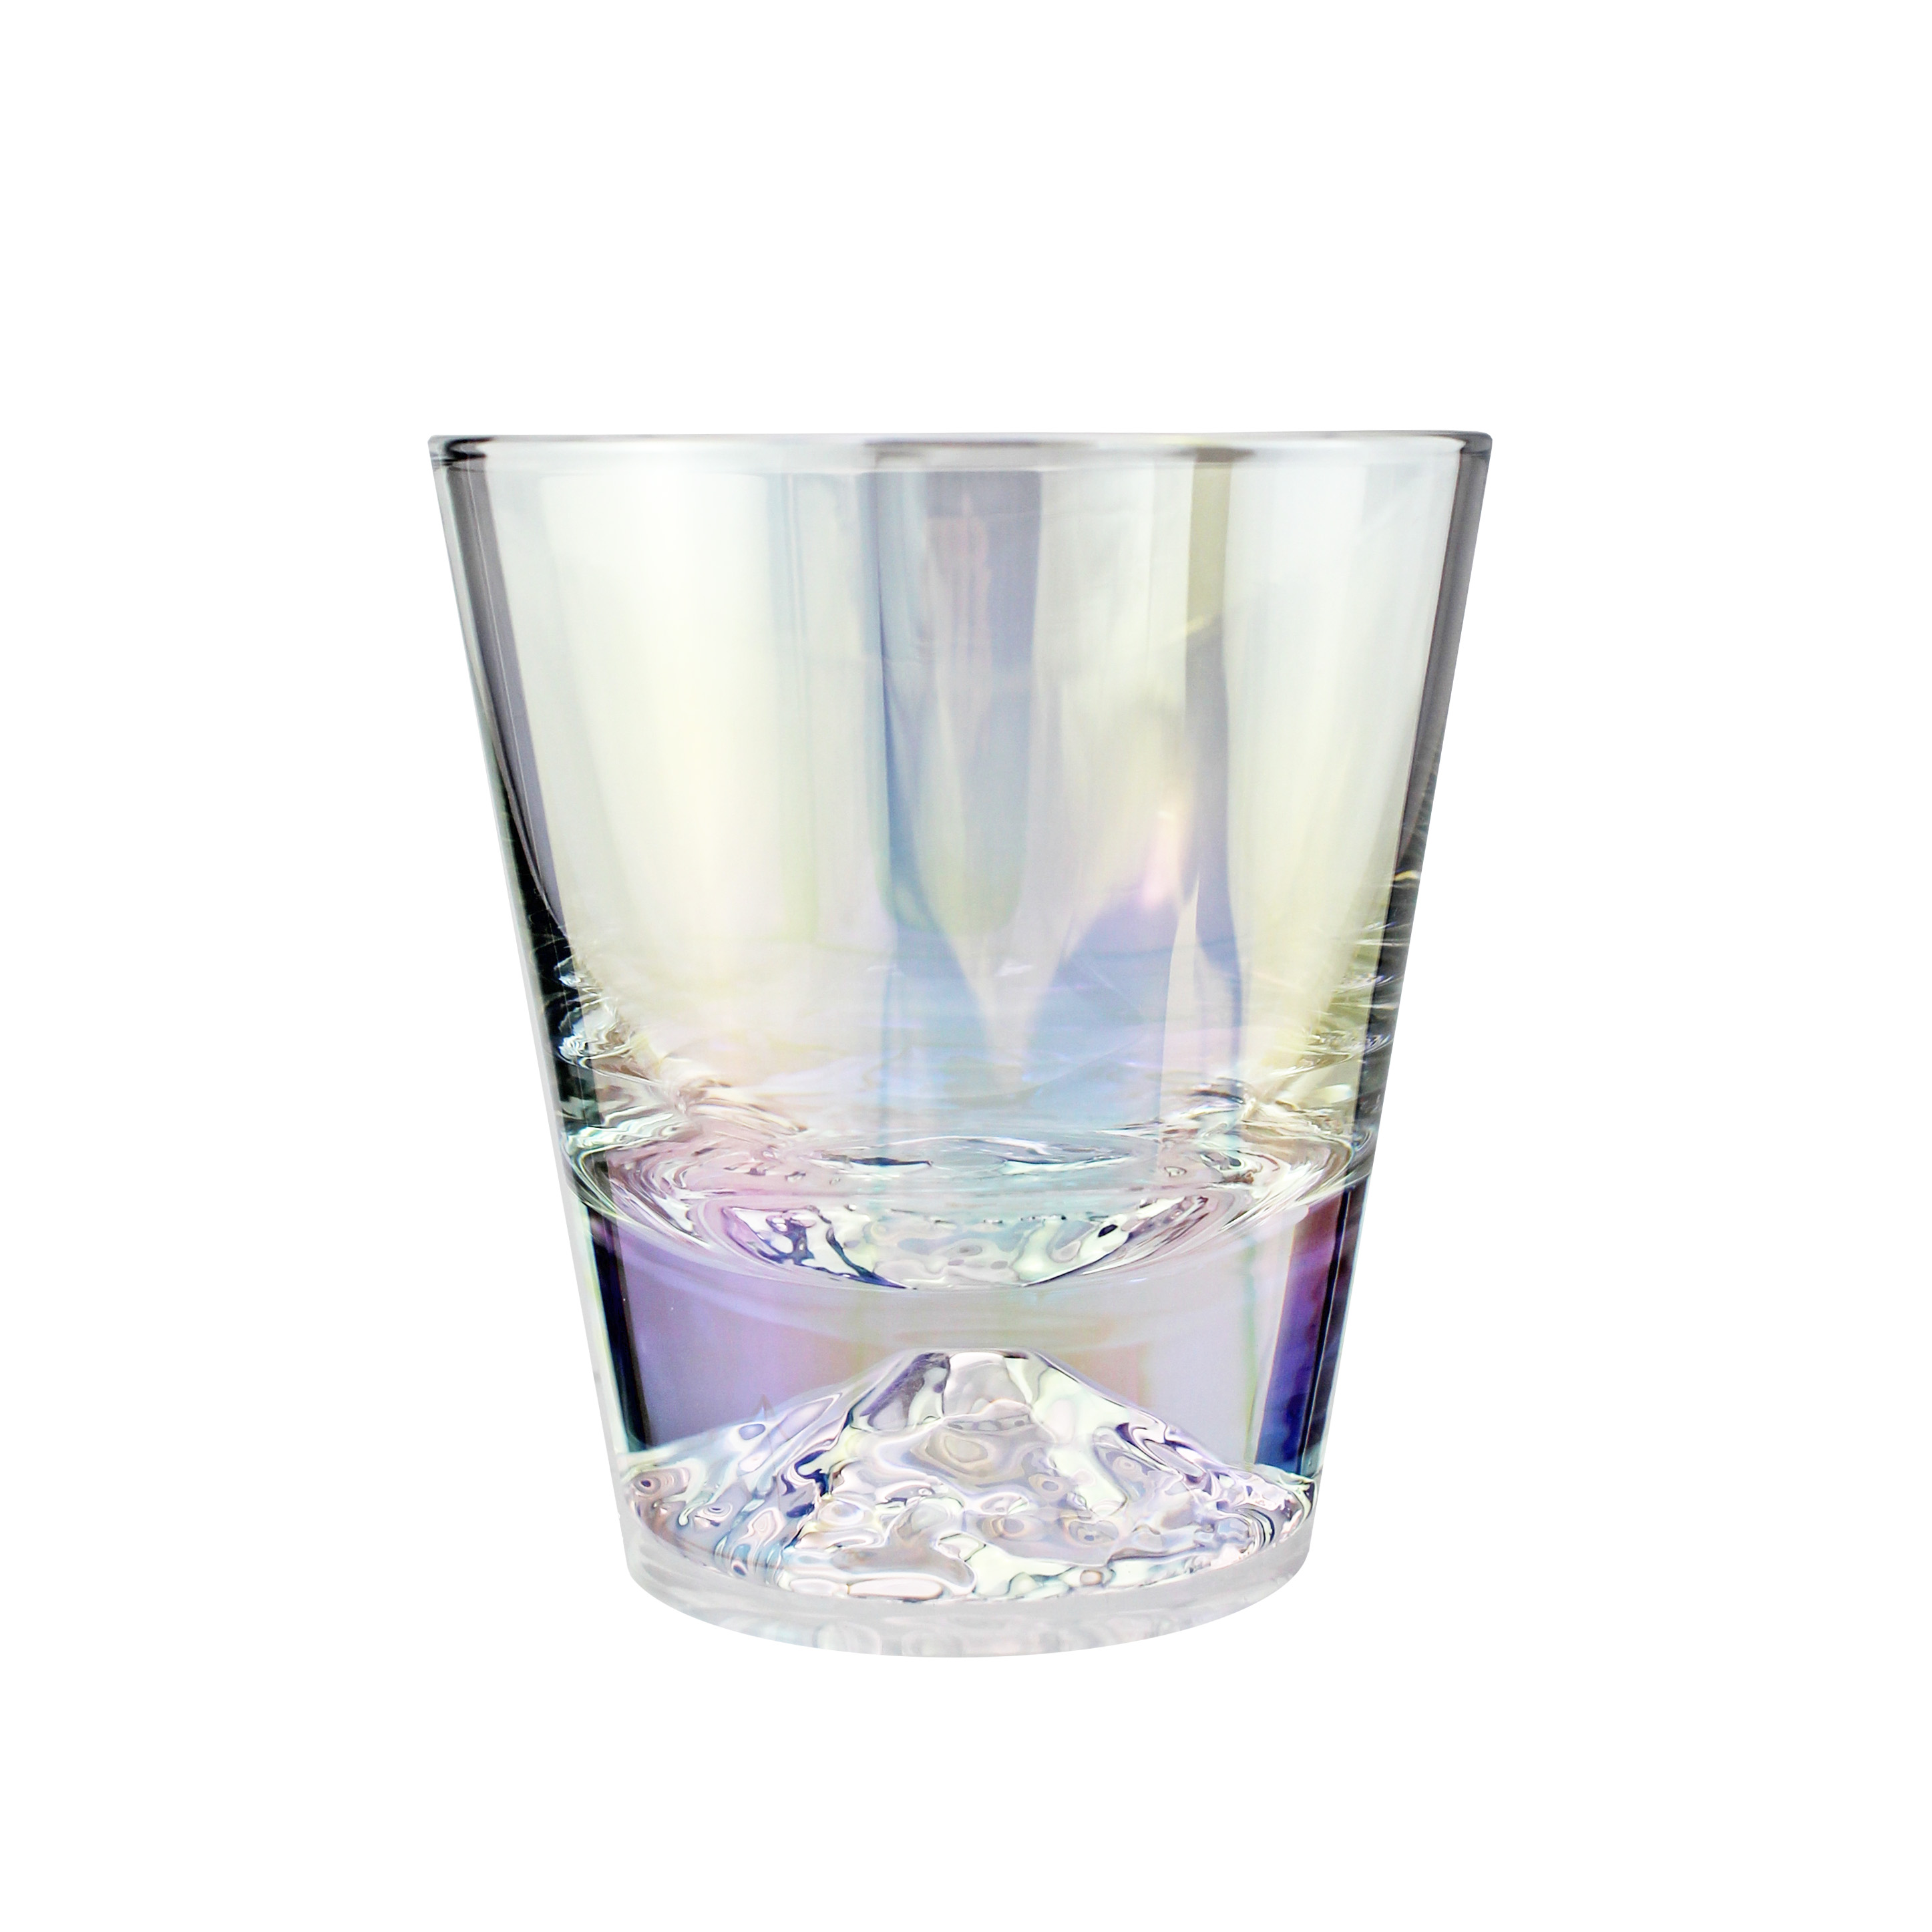 shimmering "Everest" whiskey glass by Mags